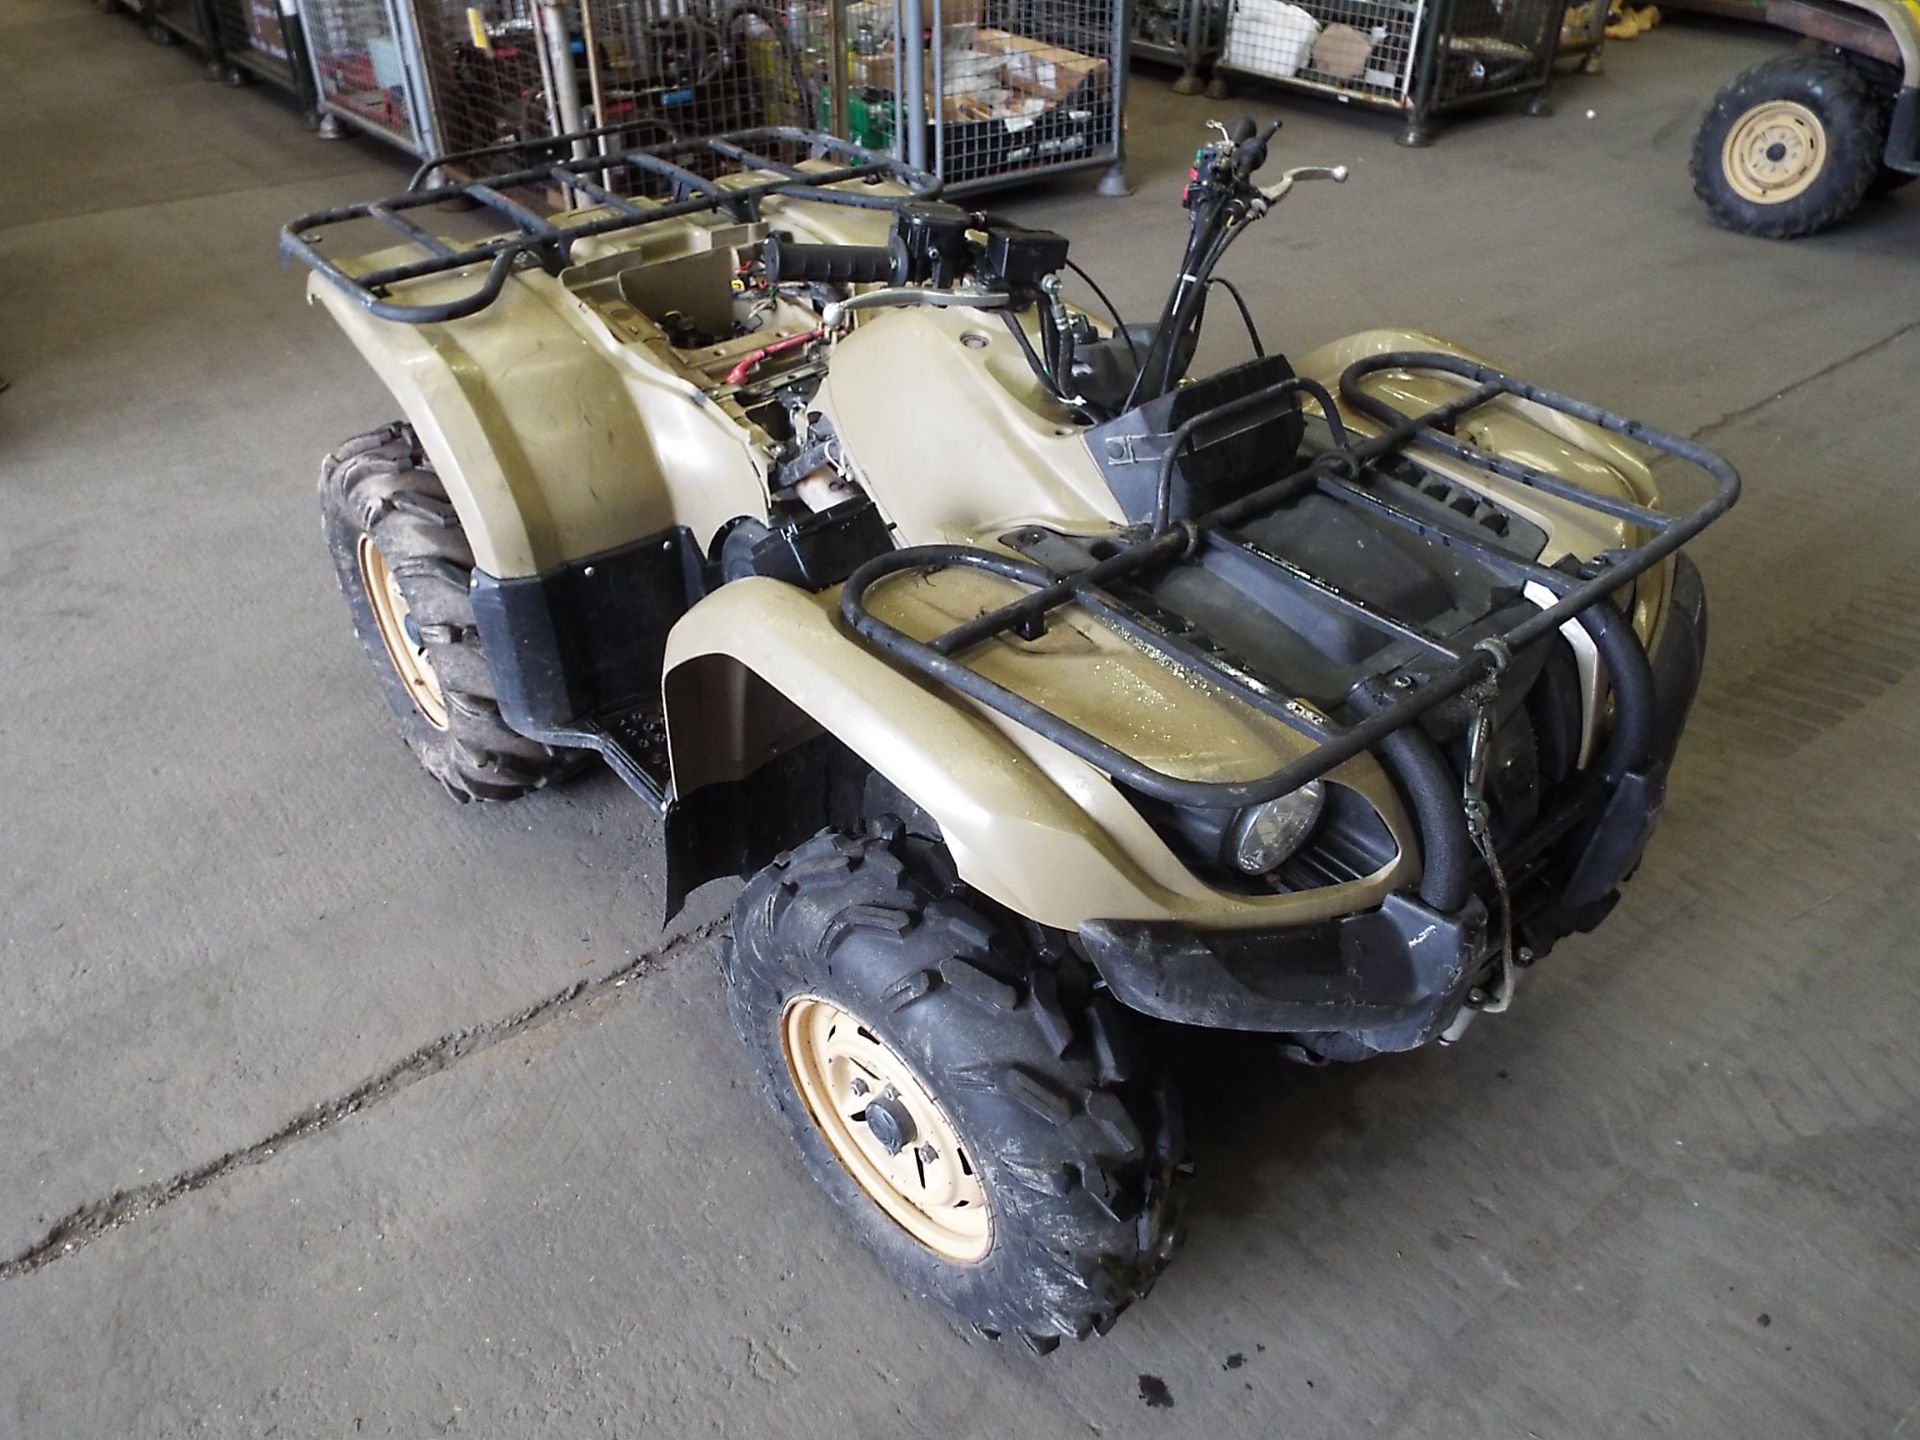 Military Specification Yamaha Grizzly 450 4 x 4 ATV Quad Bike Complete with Winch